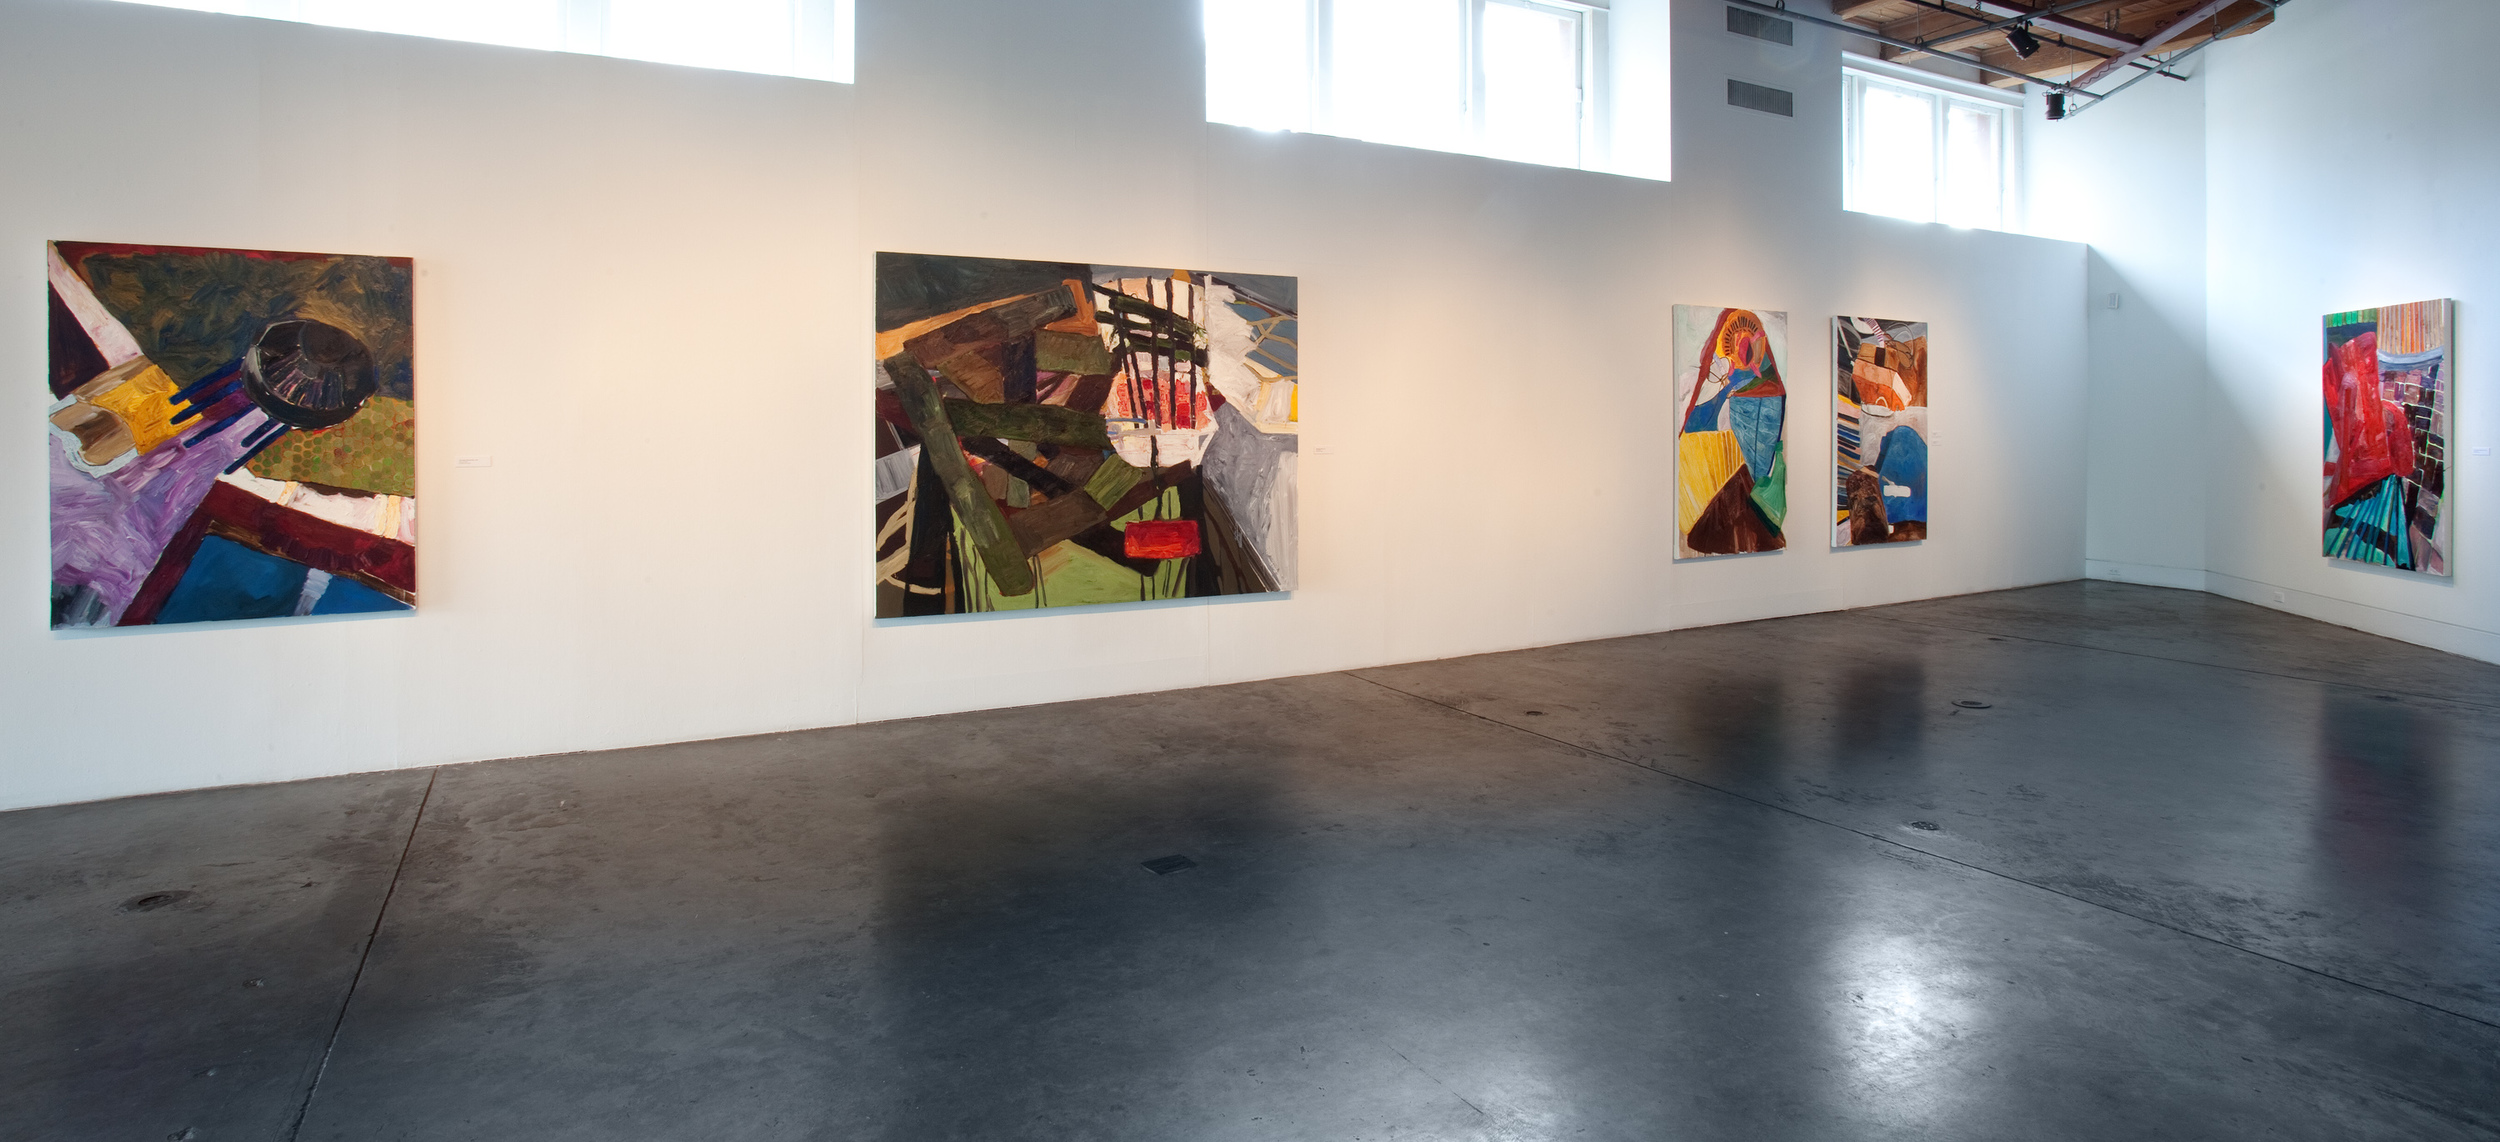 The Center Cannot Hold: Paintings and Drawings by Brooke Pickett